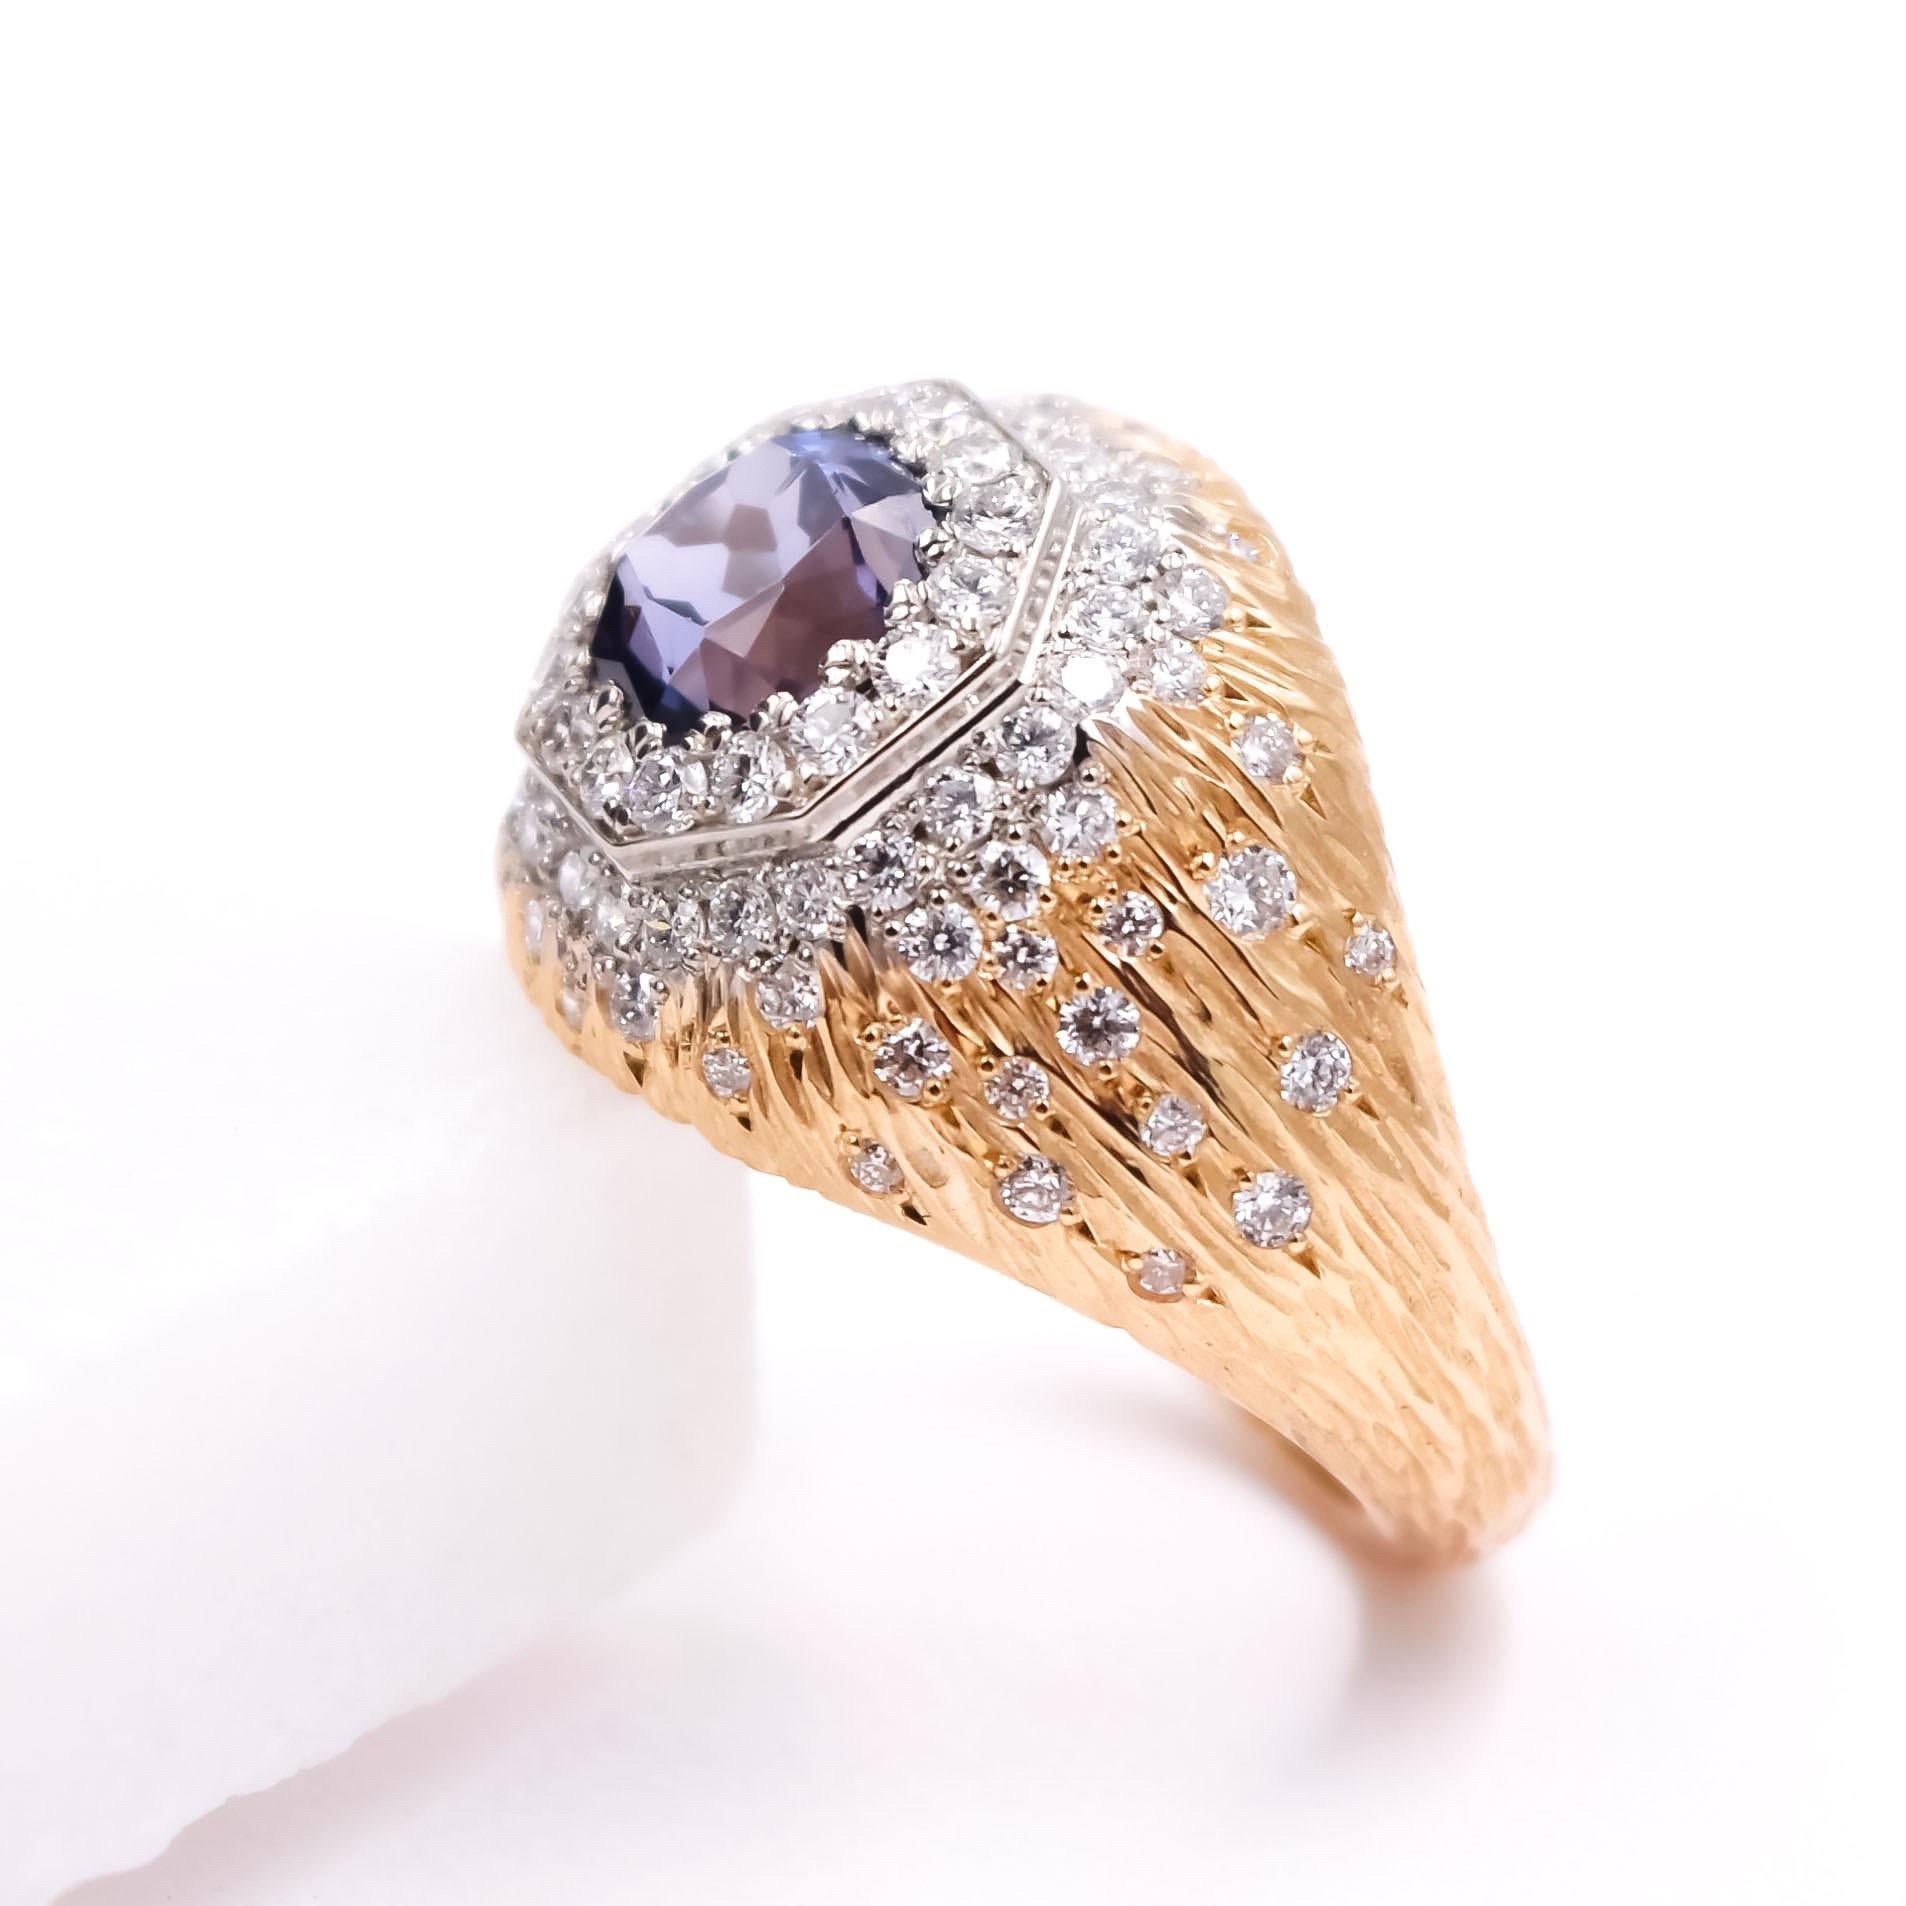 This masterpiece designed by Carl Priolo features a 1.75ct cushion cut Blue Spinel. Surrounding the Blue Spinel is a hexagon shaped pave border in 14k white gold which leads to a mixture of pave and flush set diamonds 